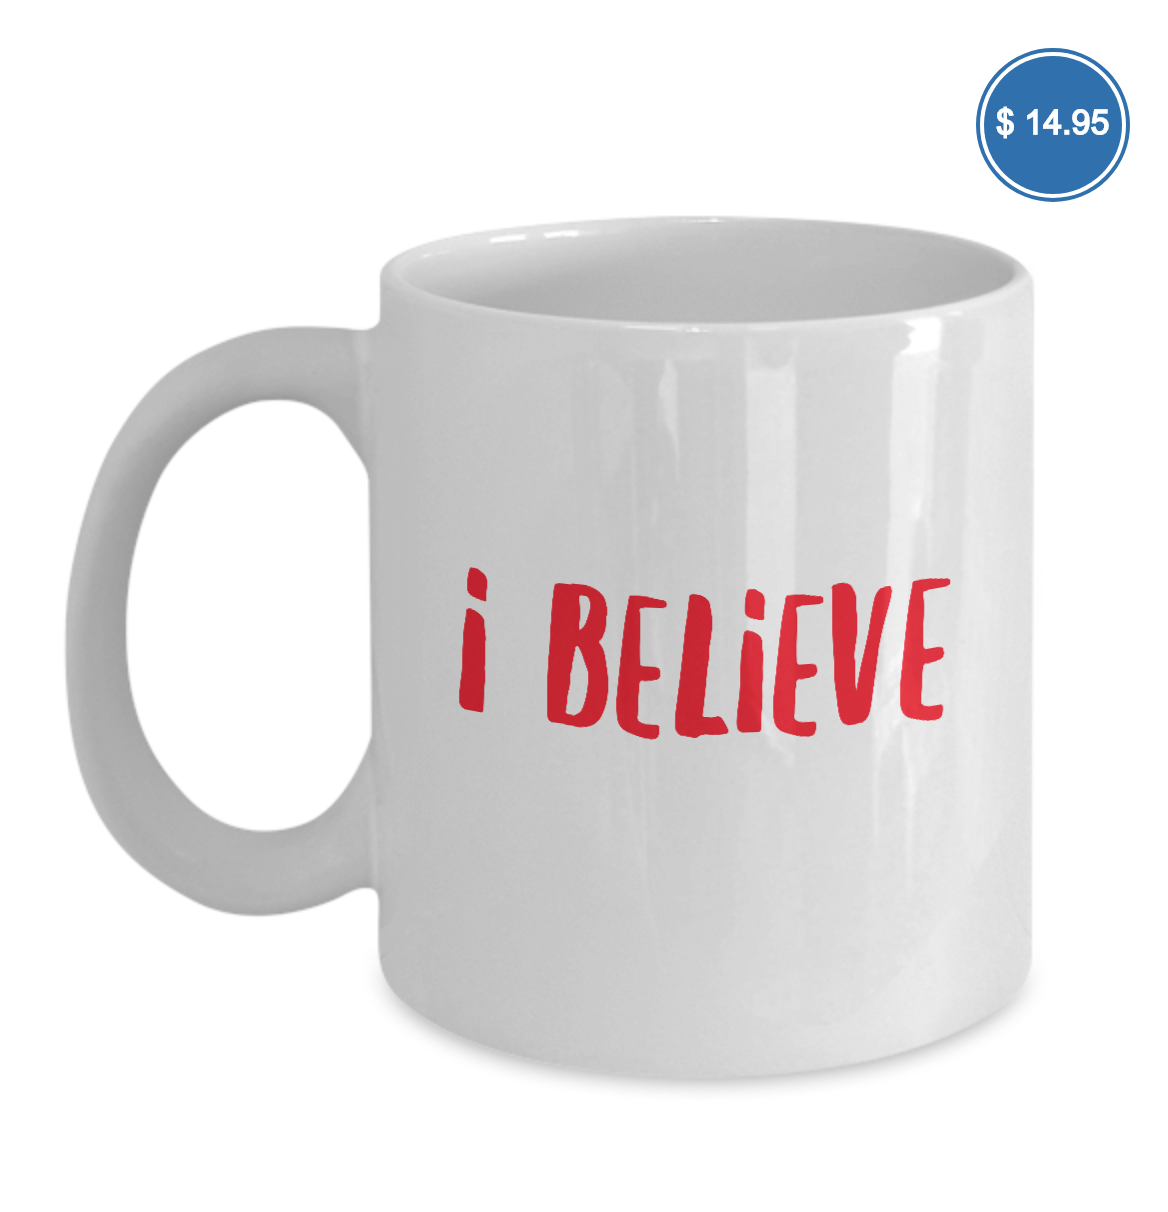 Click image to get your own I Believe mug!